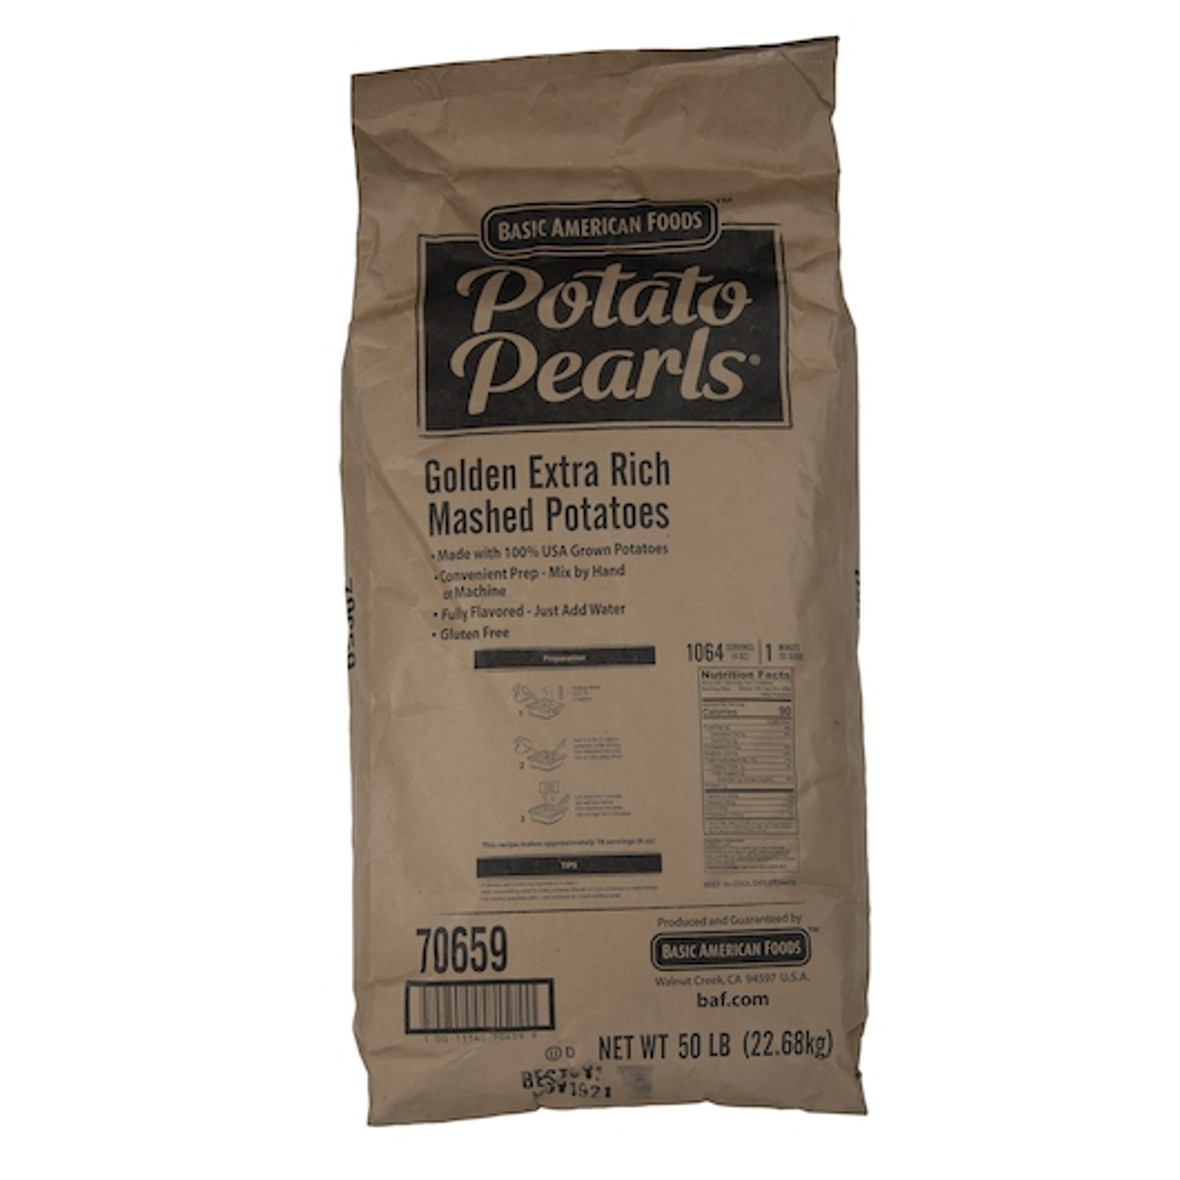 Basic American Foods Extra Rich Golden Potato Pearls, 50 Pound